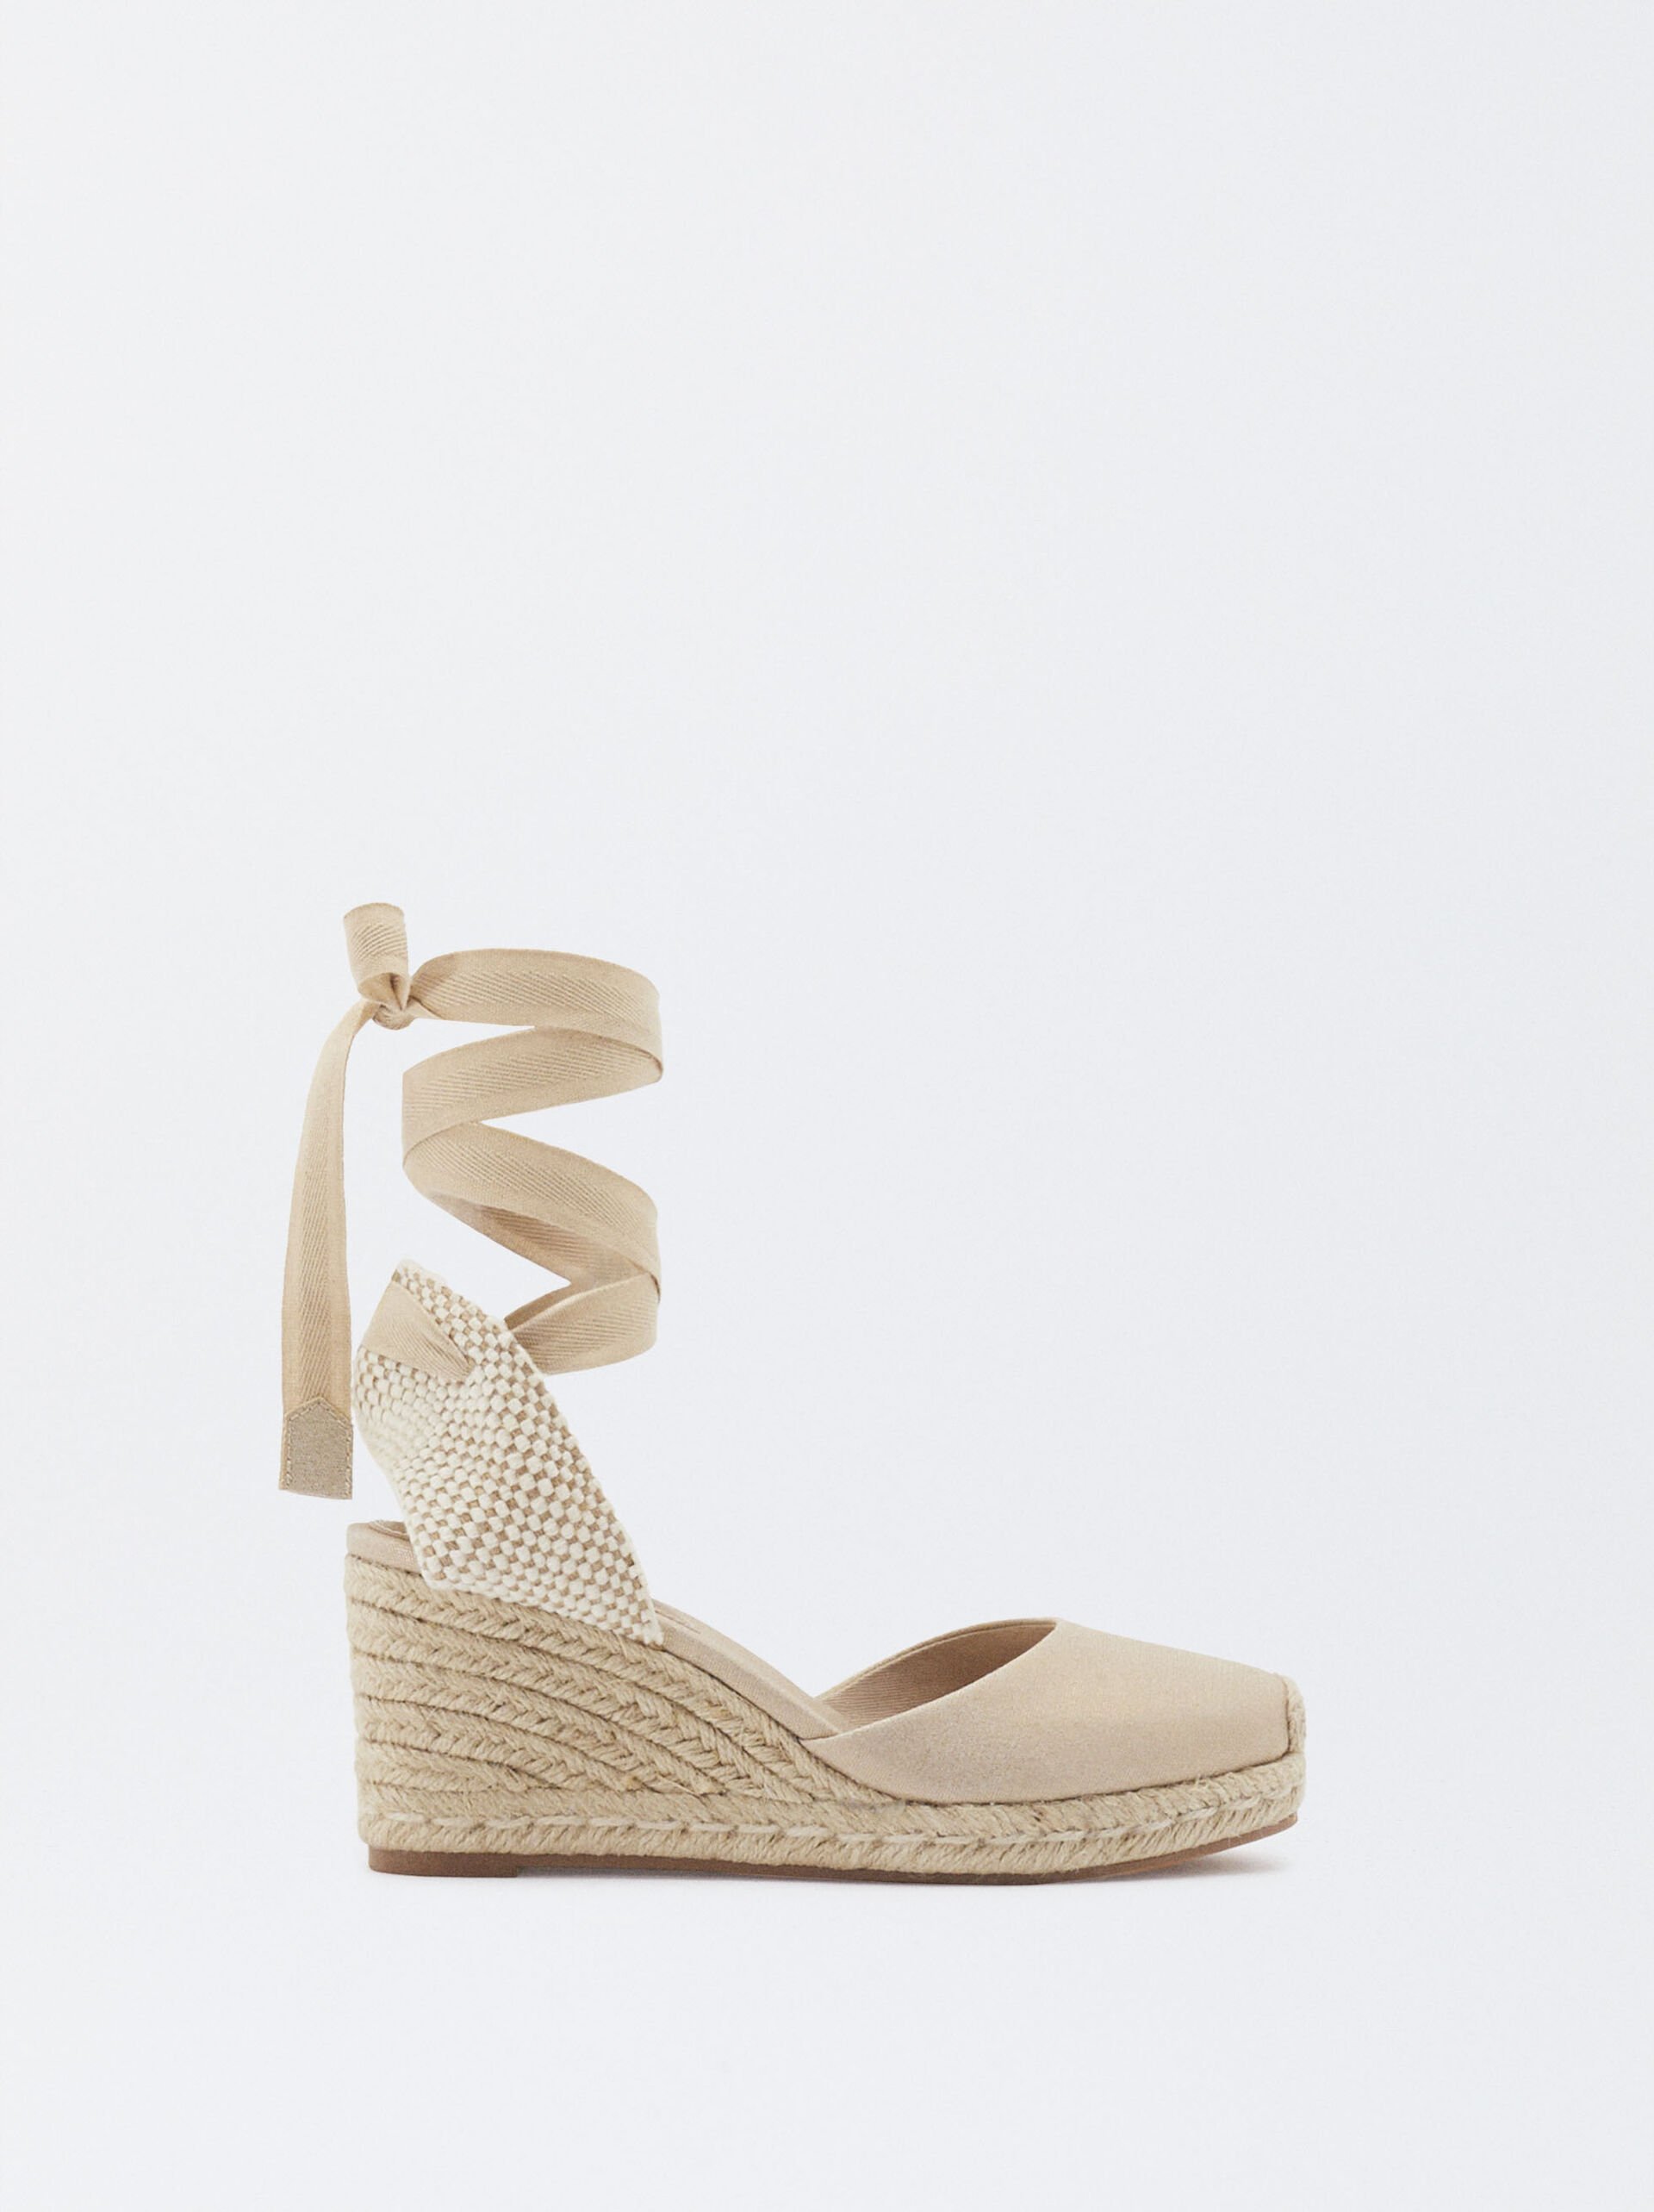 Lace Up Fabric Wedges image number 2.0